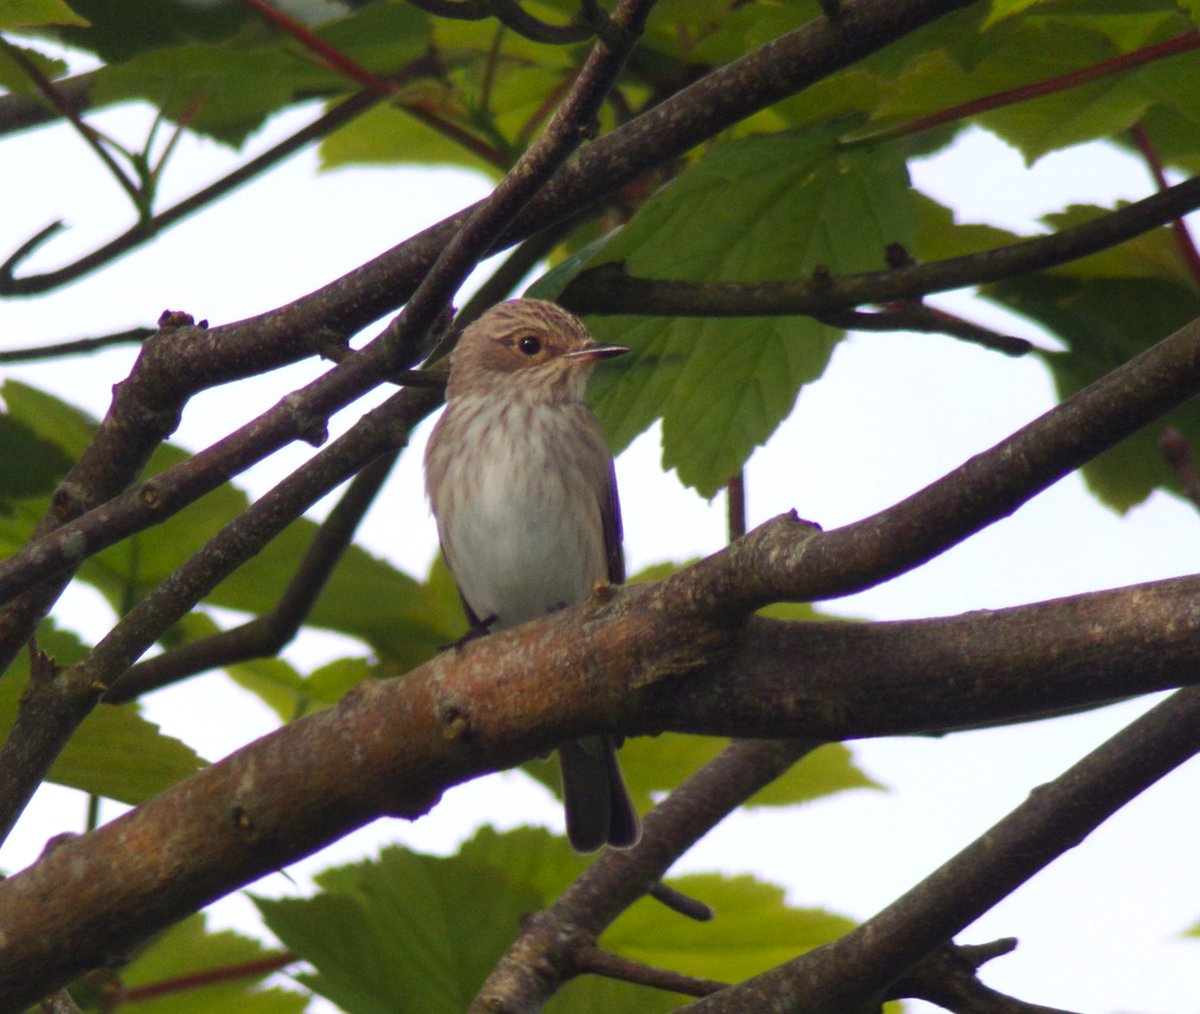 First Spotted Flycatcher of the spring in the Balephuil garden #Tiree this morning - always good to see. Belated news of a female Blue-headed Wagtail at Balephetrish Bay and a Wood Sandpiper at Loch a' Phuill - both on 9 May @BirdGuides @PatchBirding